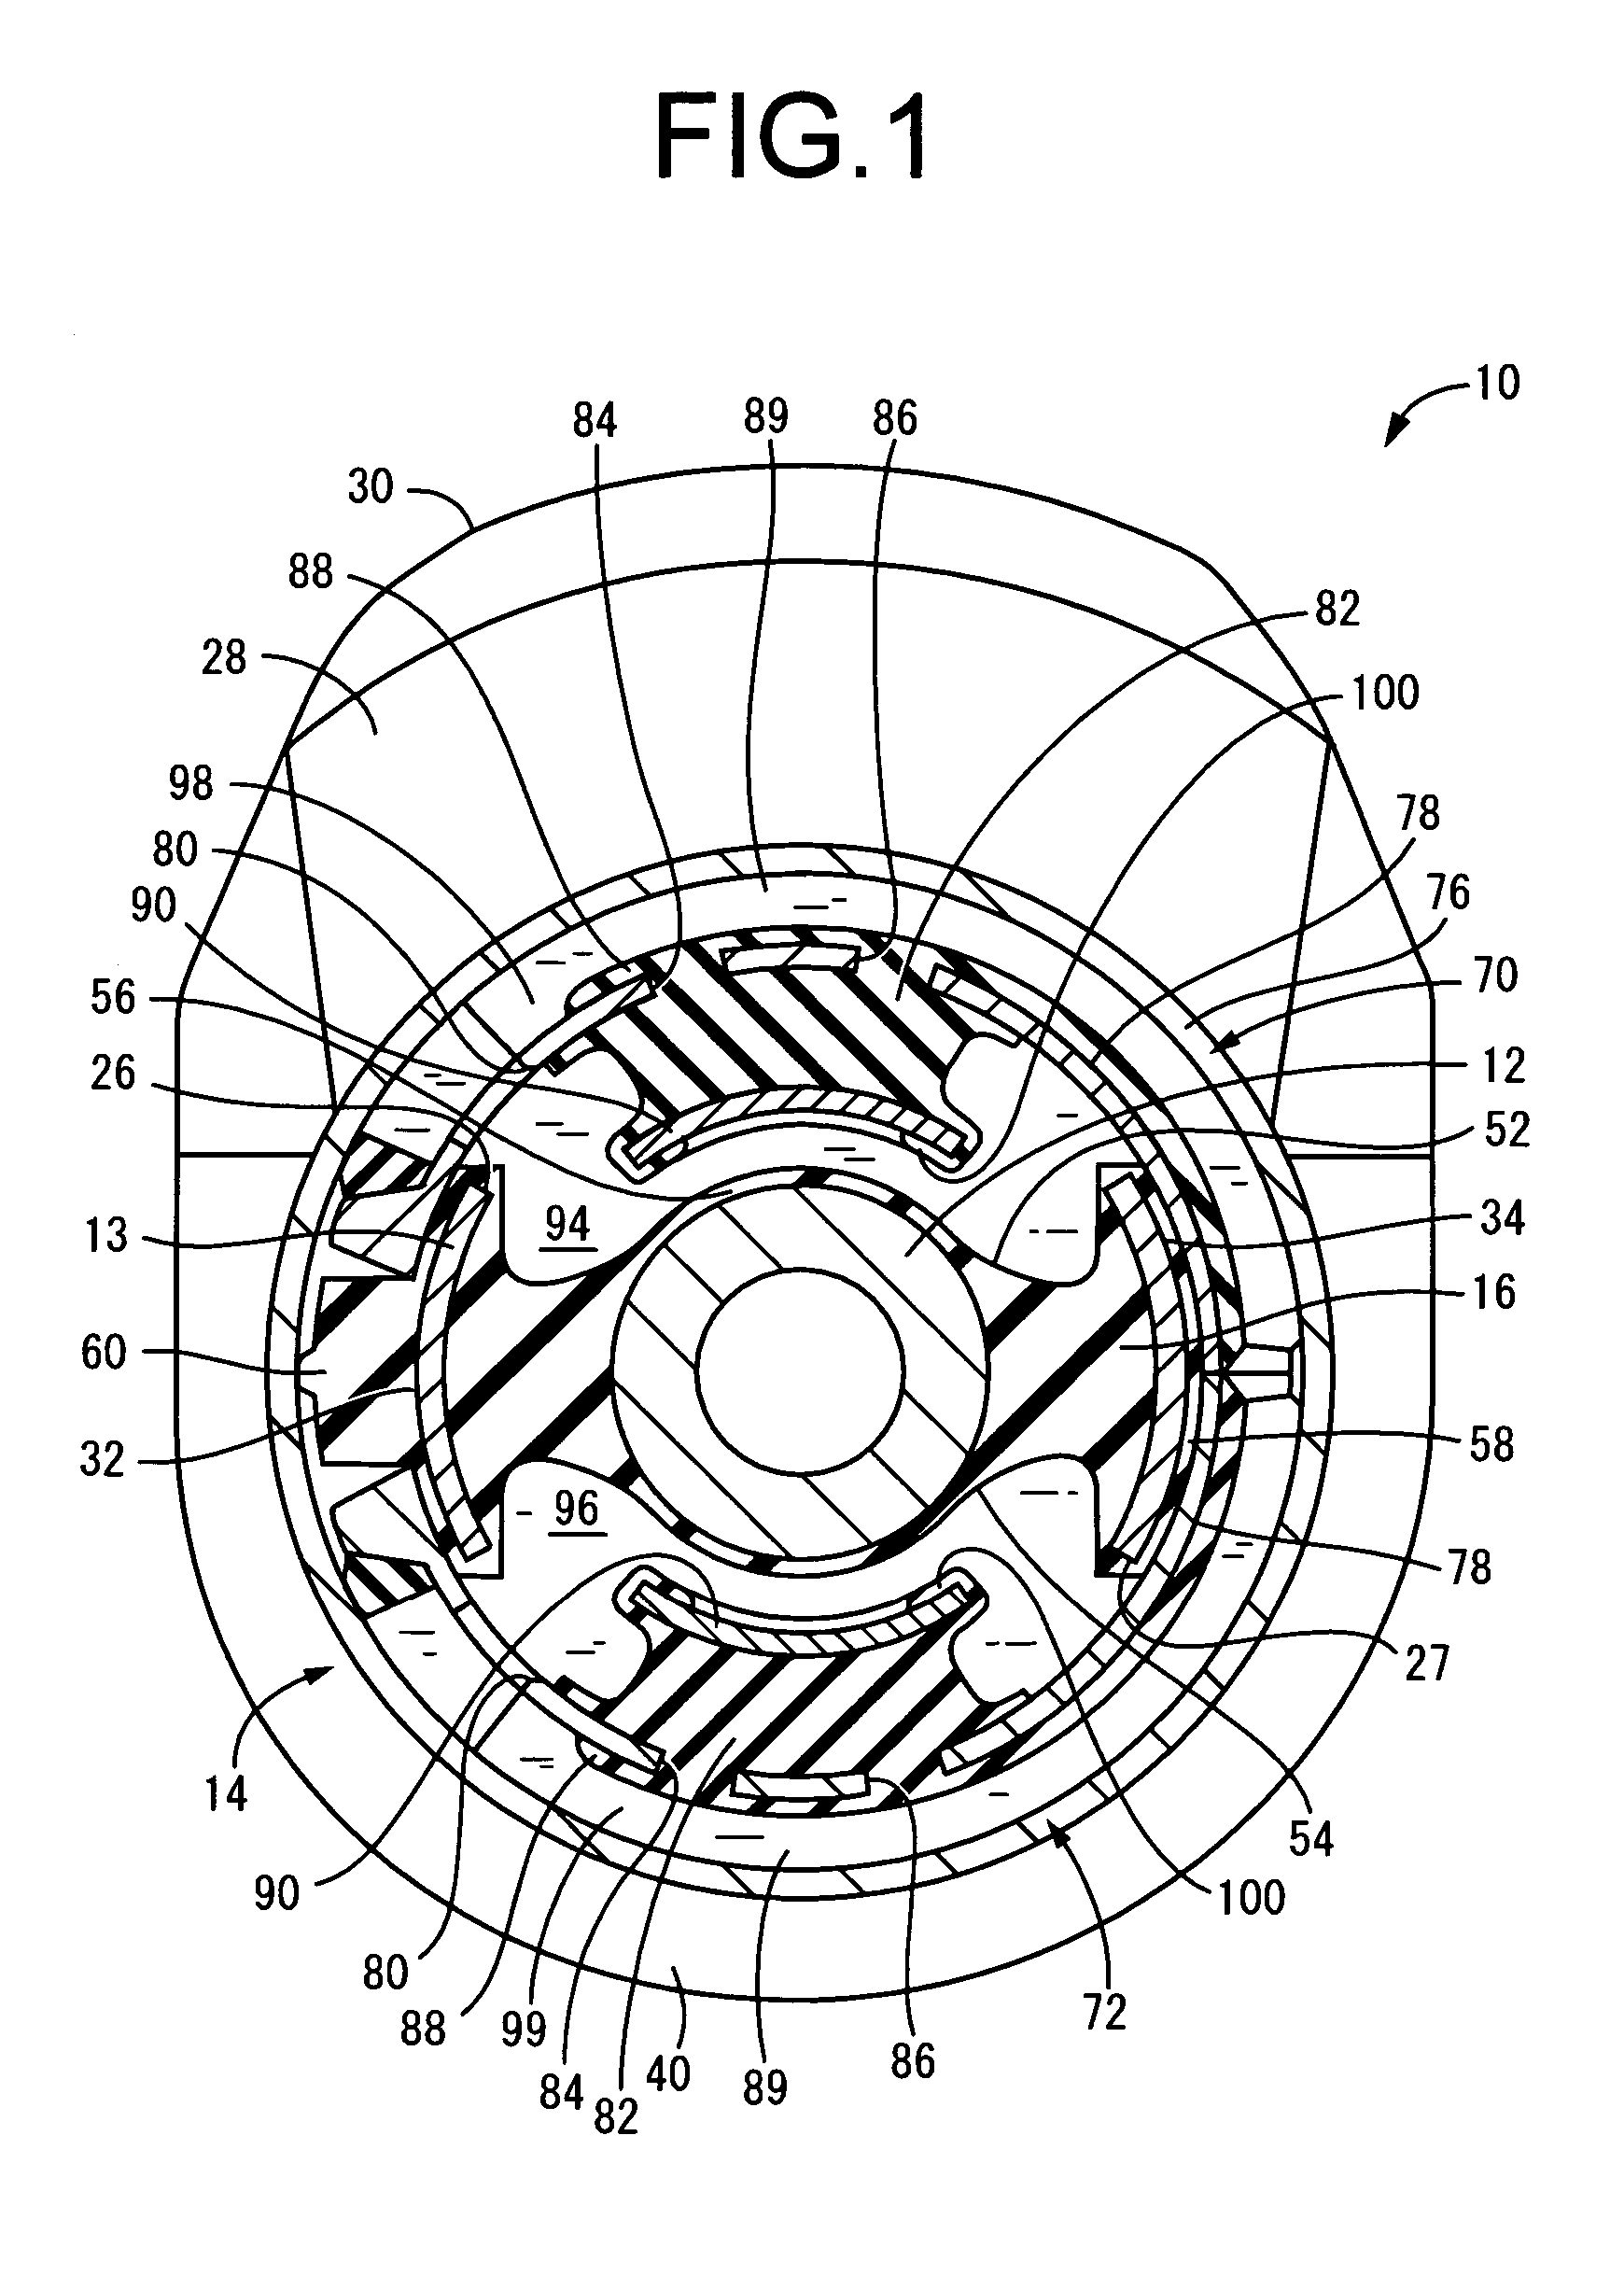 Fluid filled cylindrical vibration damping device